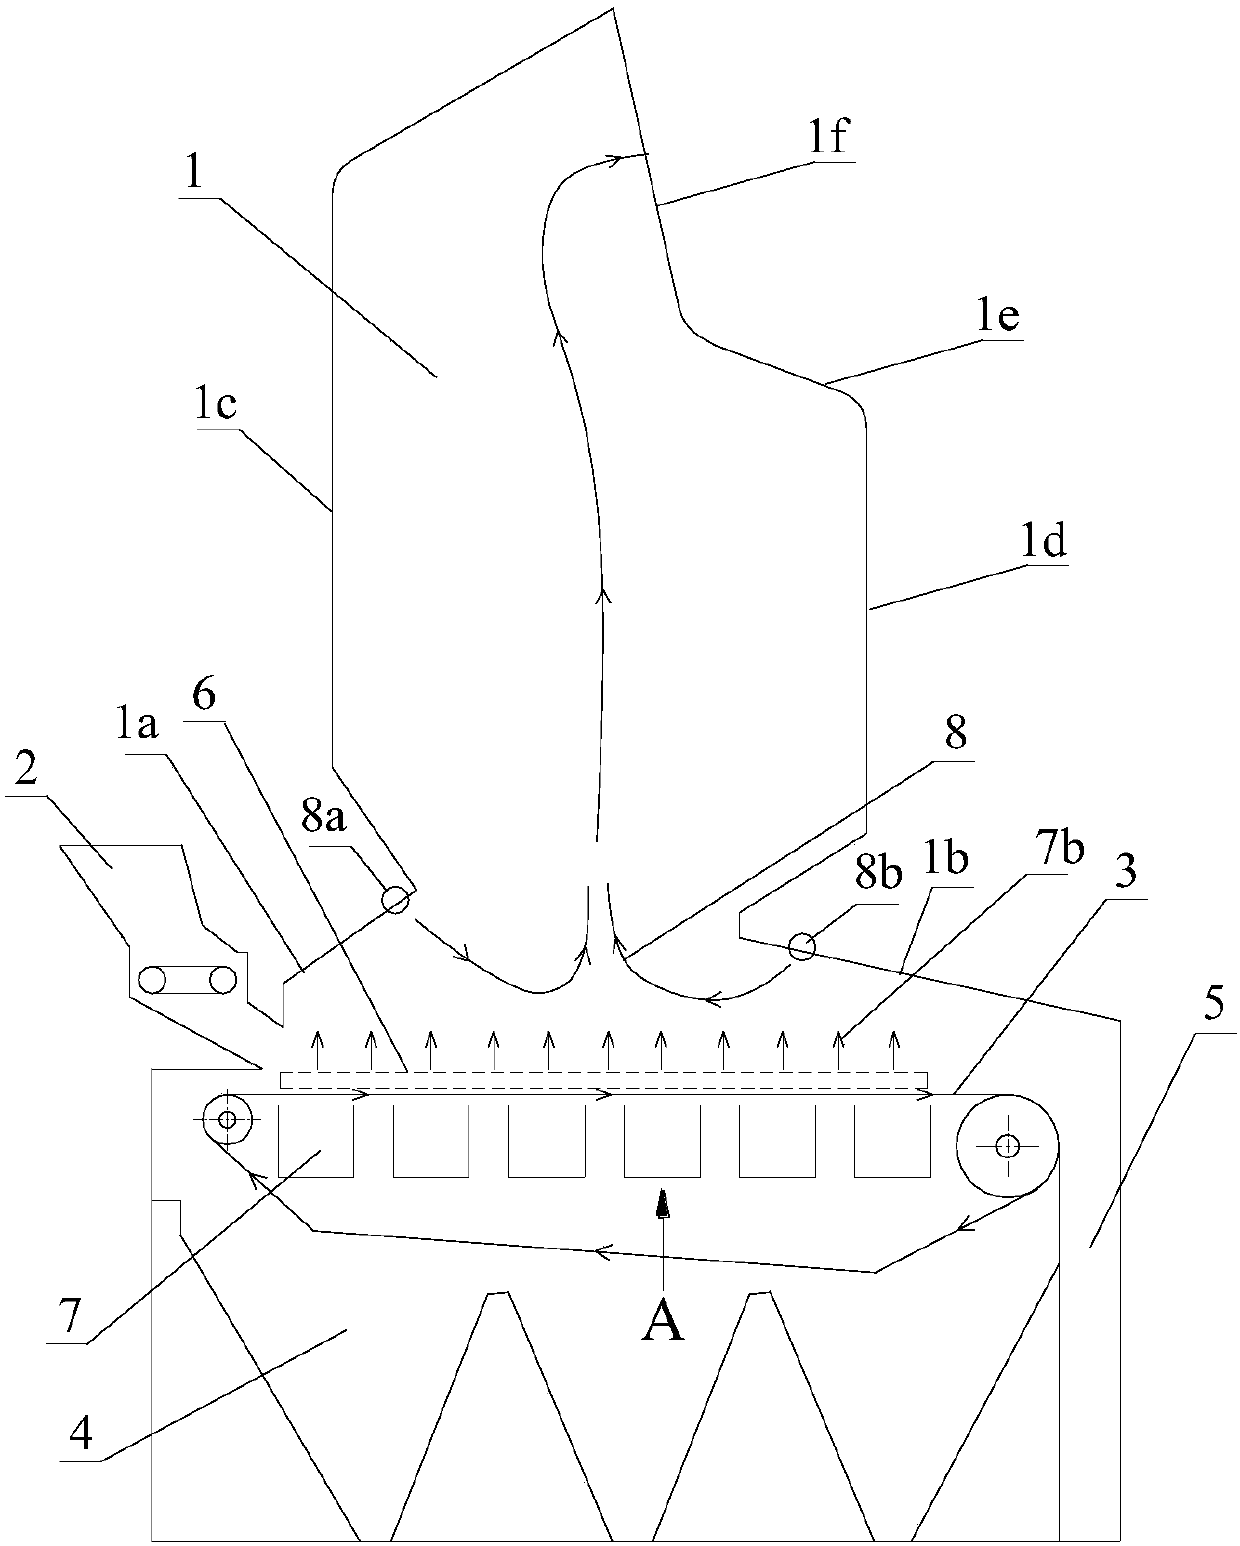 Low-NO&lt;x&gt; efficient chain grate furnace with function of distributing air by area in width direction of grate